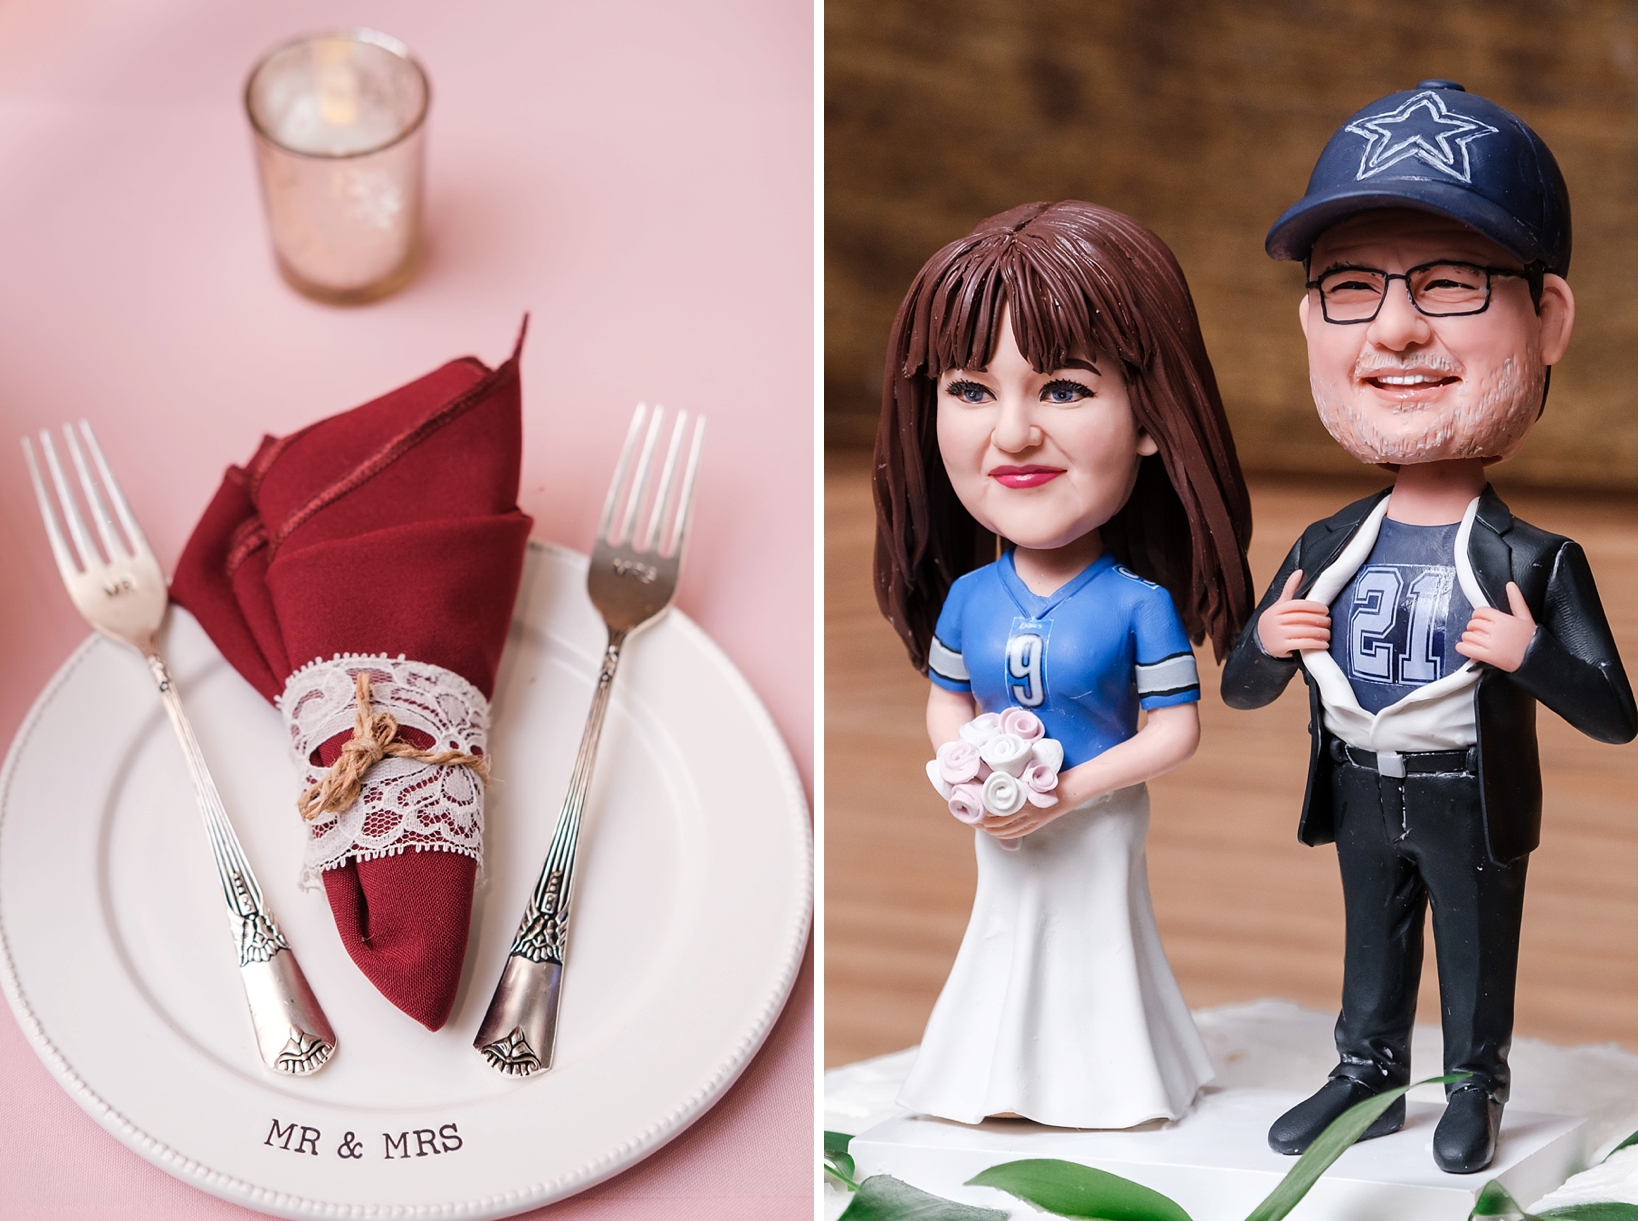 Wedding cake serving dish and forks as well as close up of the custom made bobble head cake toppers